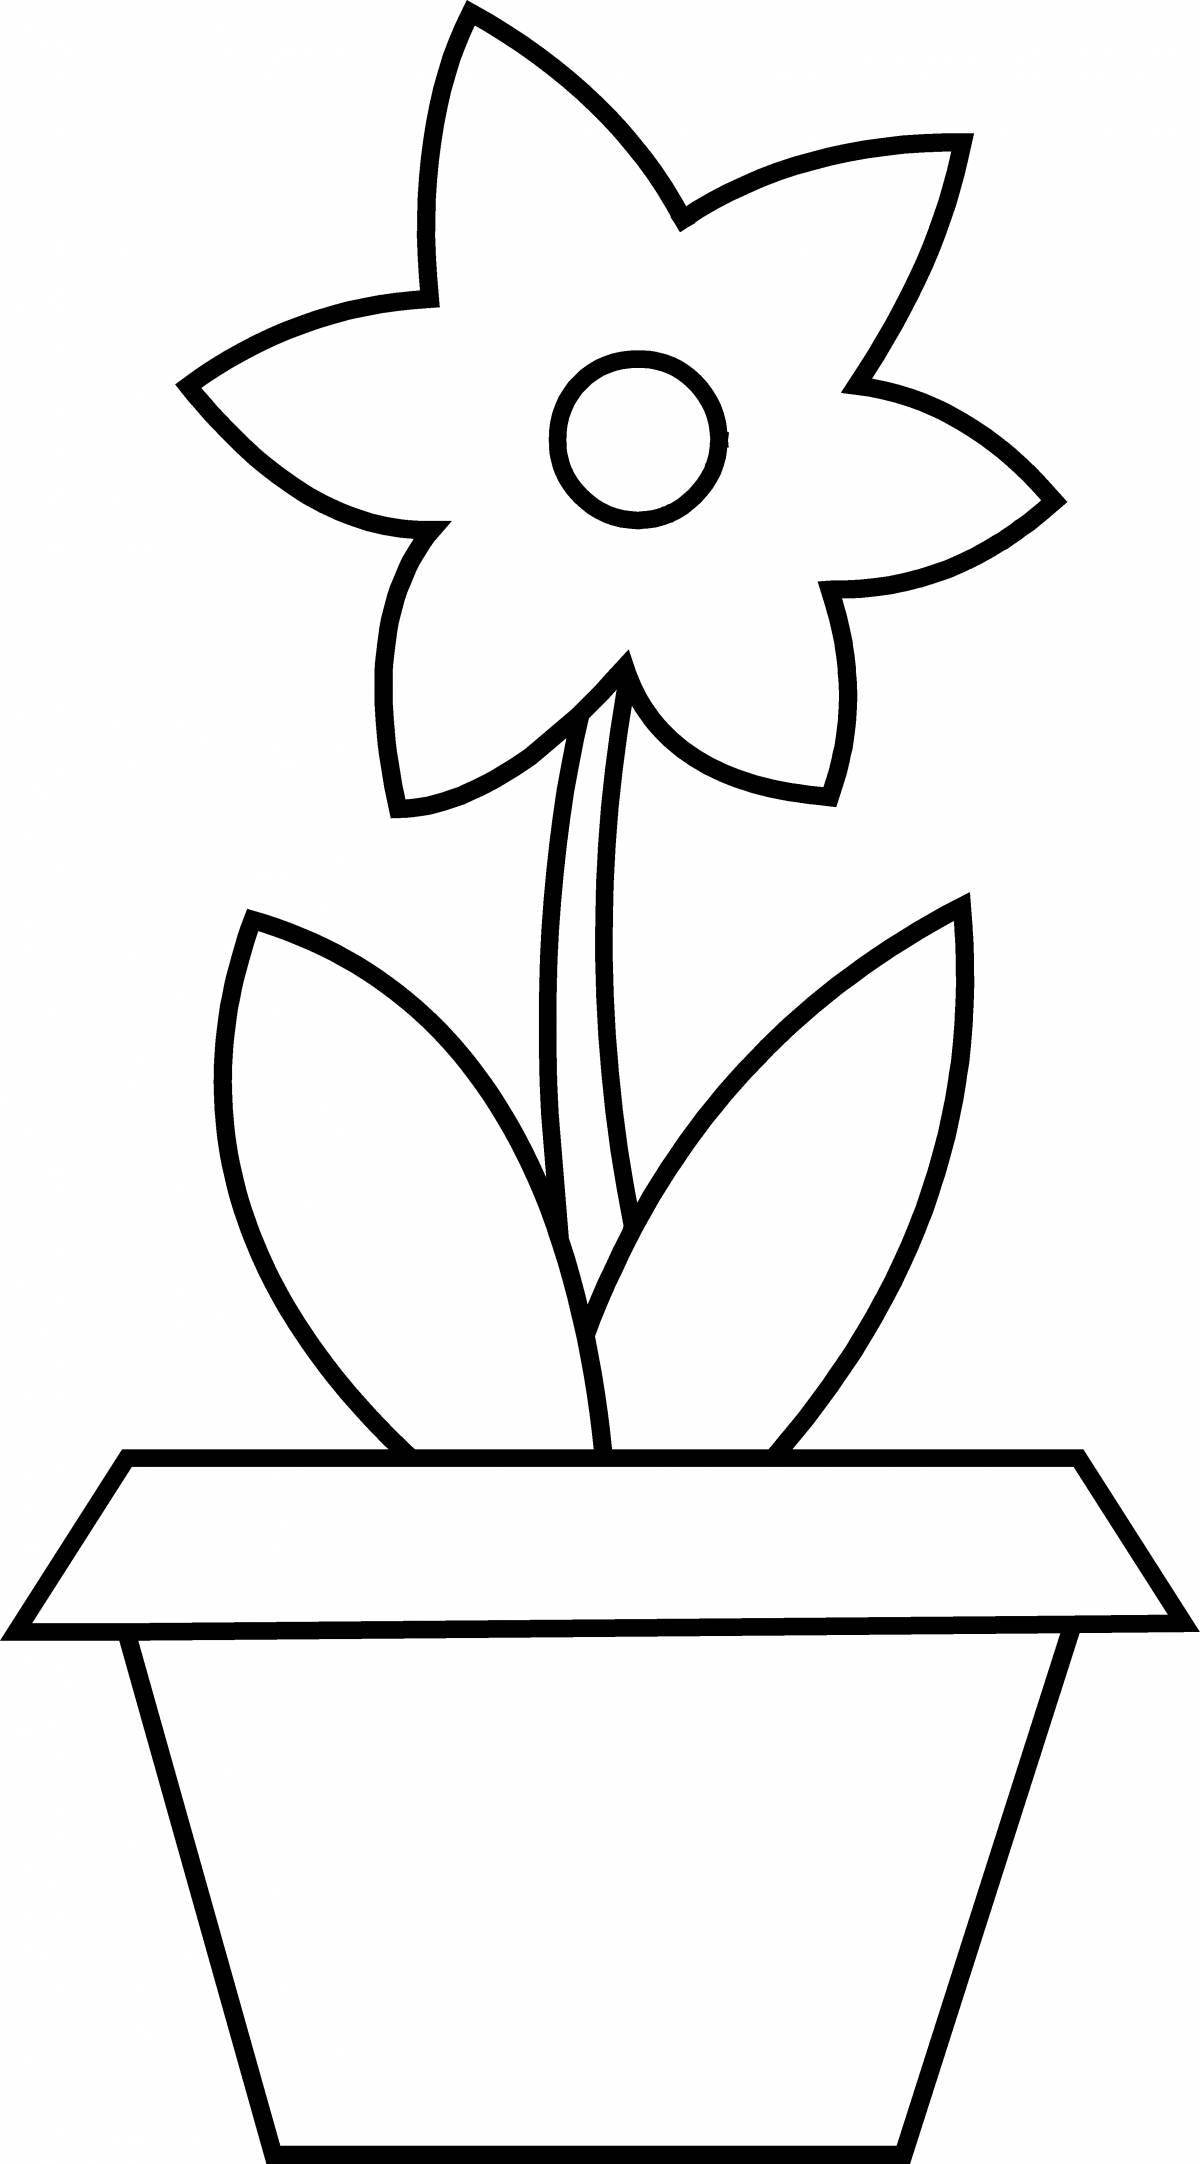 Exquisite flower pot coloring book for children